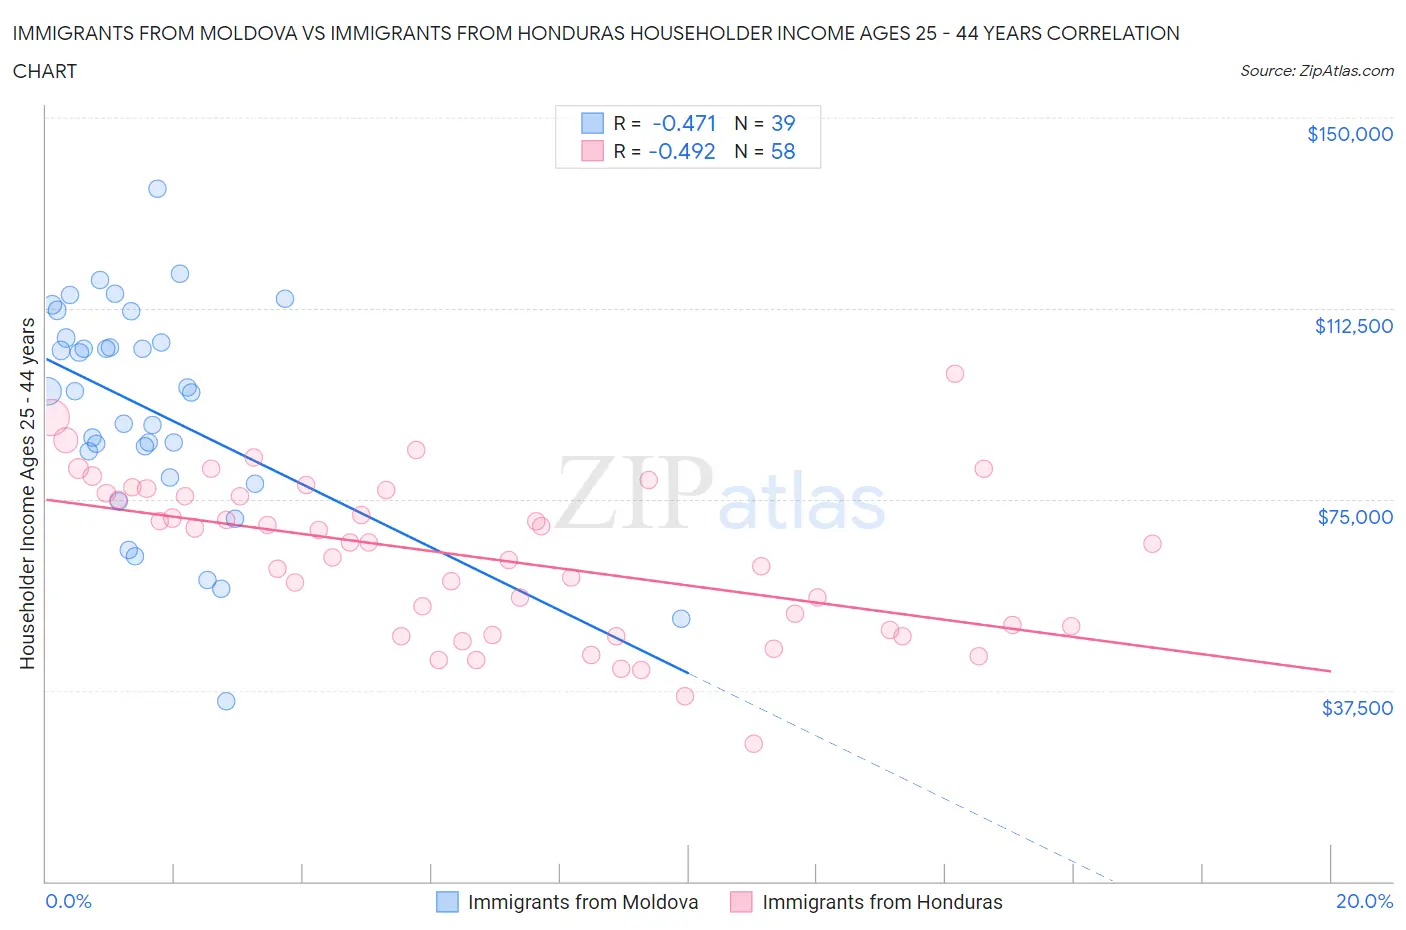 Immigrants from Moldova vs Immigrants from Honduras Householder Income Ages 25 - 44 years